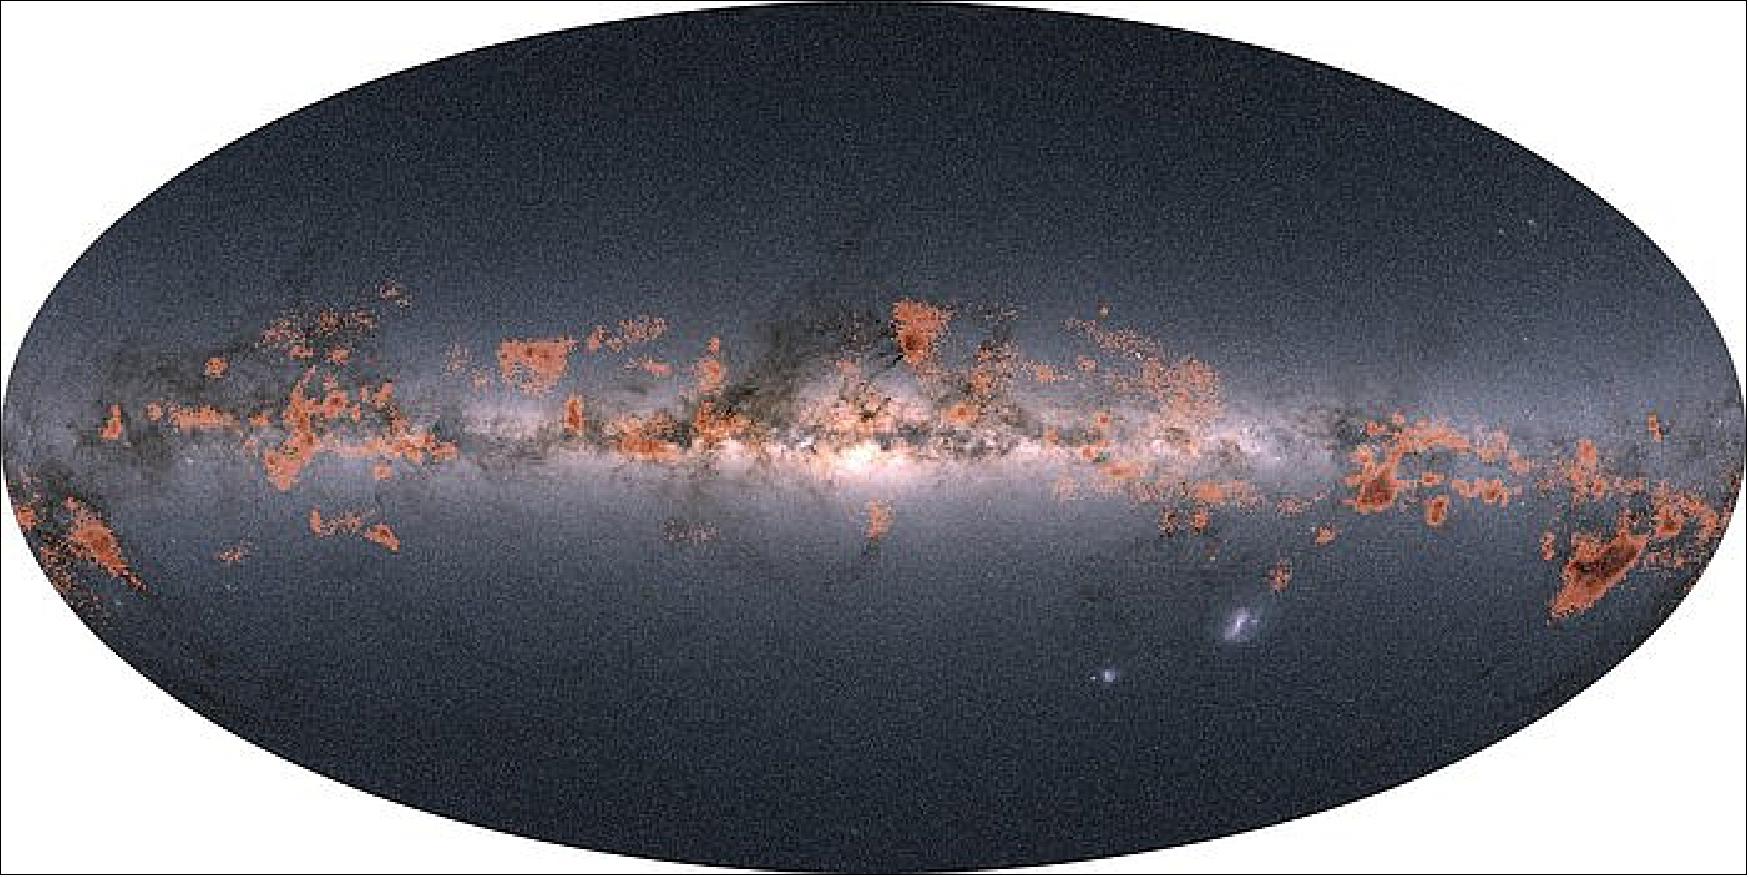 Figure 4: This image shows a view of stellar ‘families' – clusters and co-moving groups of stars in the Milky Way – identified using data from the second data release of ESA's Gaia mission. Families younger than 30 million years are highlighted in orange, on top of an all-sky view based on Gaia observations [image credit: ESA/Gaia/DPAC; Data: M. Kounkel & K. Covey (2019)]